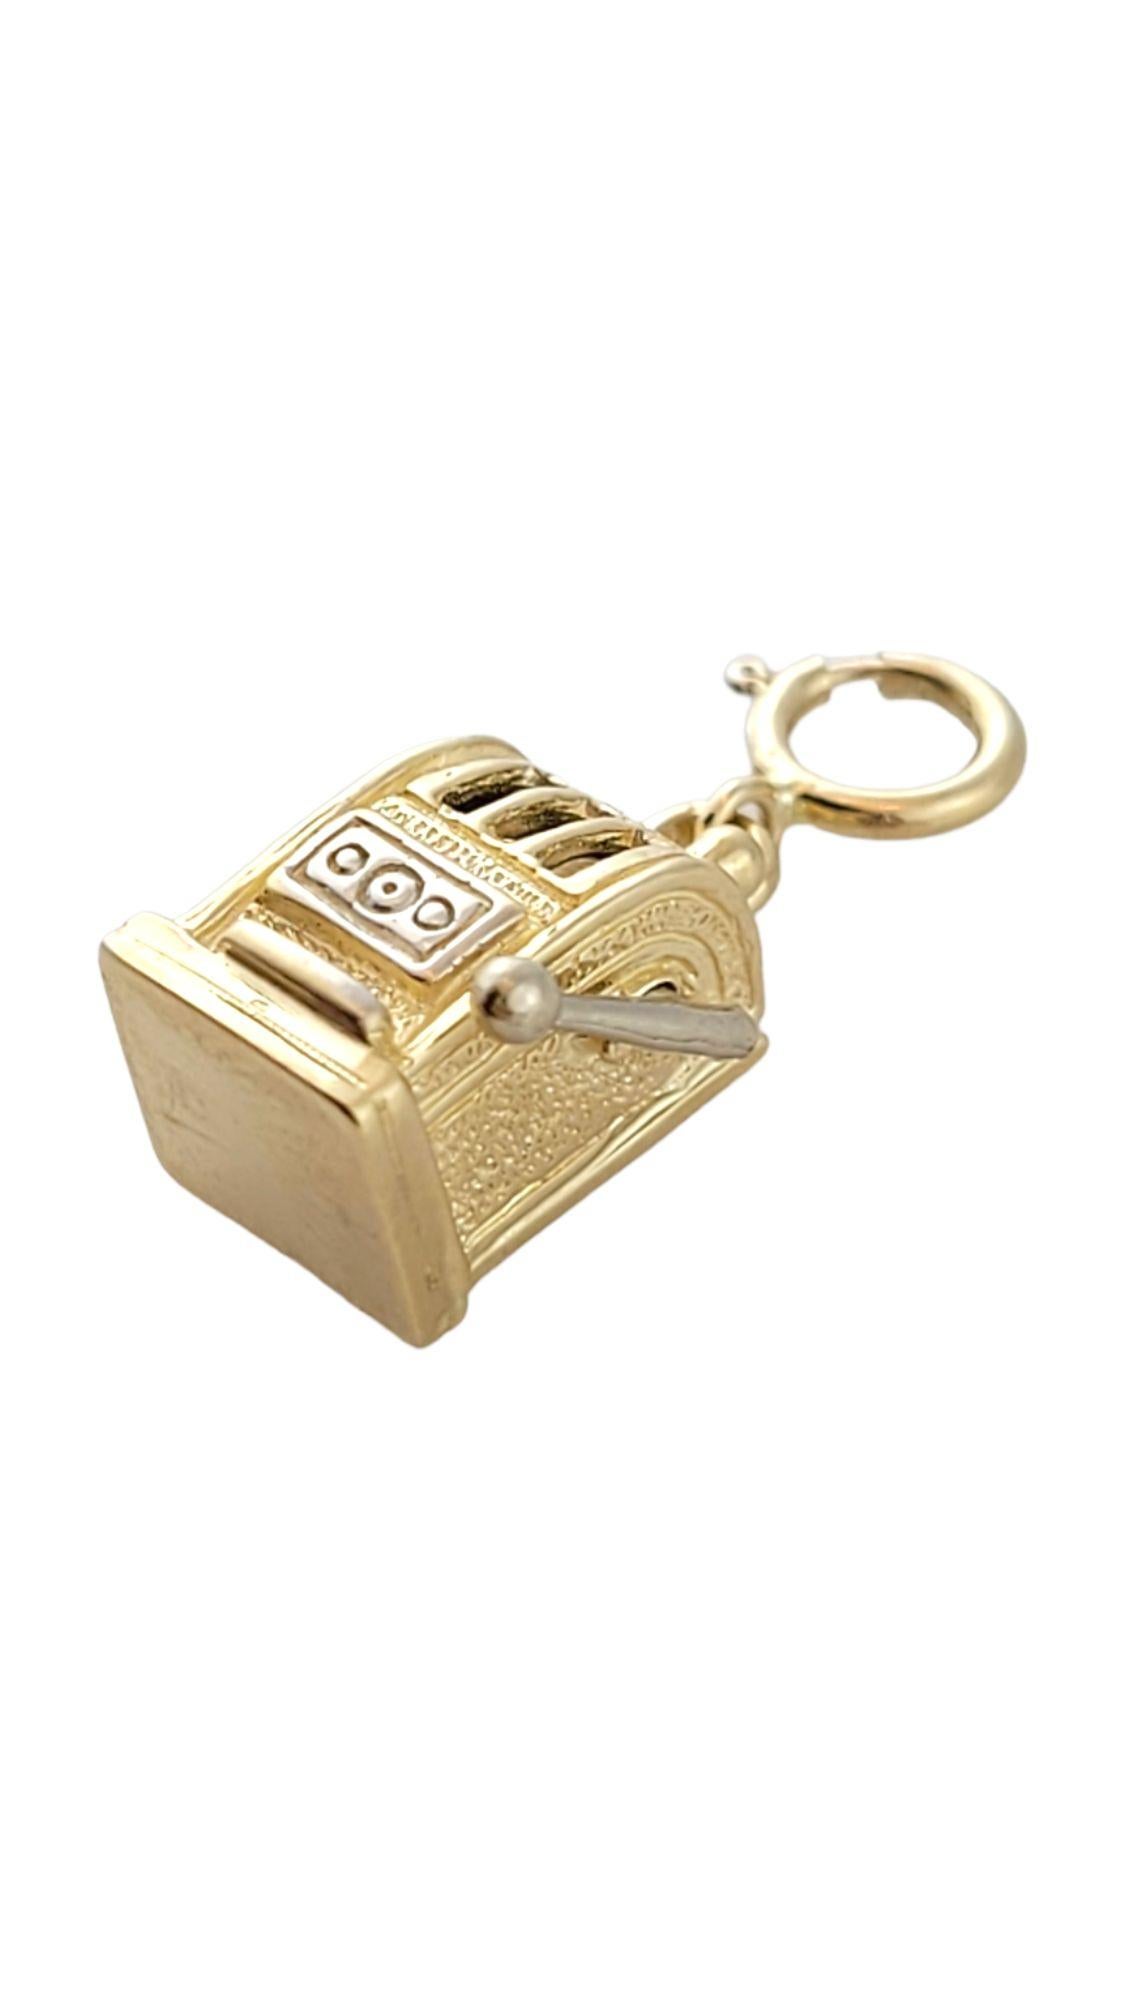 This adorable 14K gold slot machine charm features a moving handle to represent the way a real slot machine works!

Size: 13.8mm X 9.3mm X 7.5mm

Length w/ bail: 21.5mm

Weight: 3.8 g/ 2.4 dwt

Hallmark: 585

Very good condition, professionally